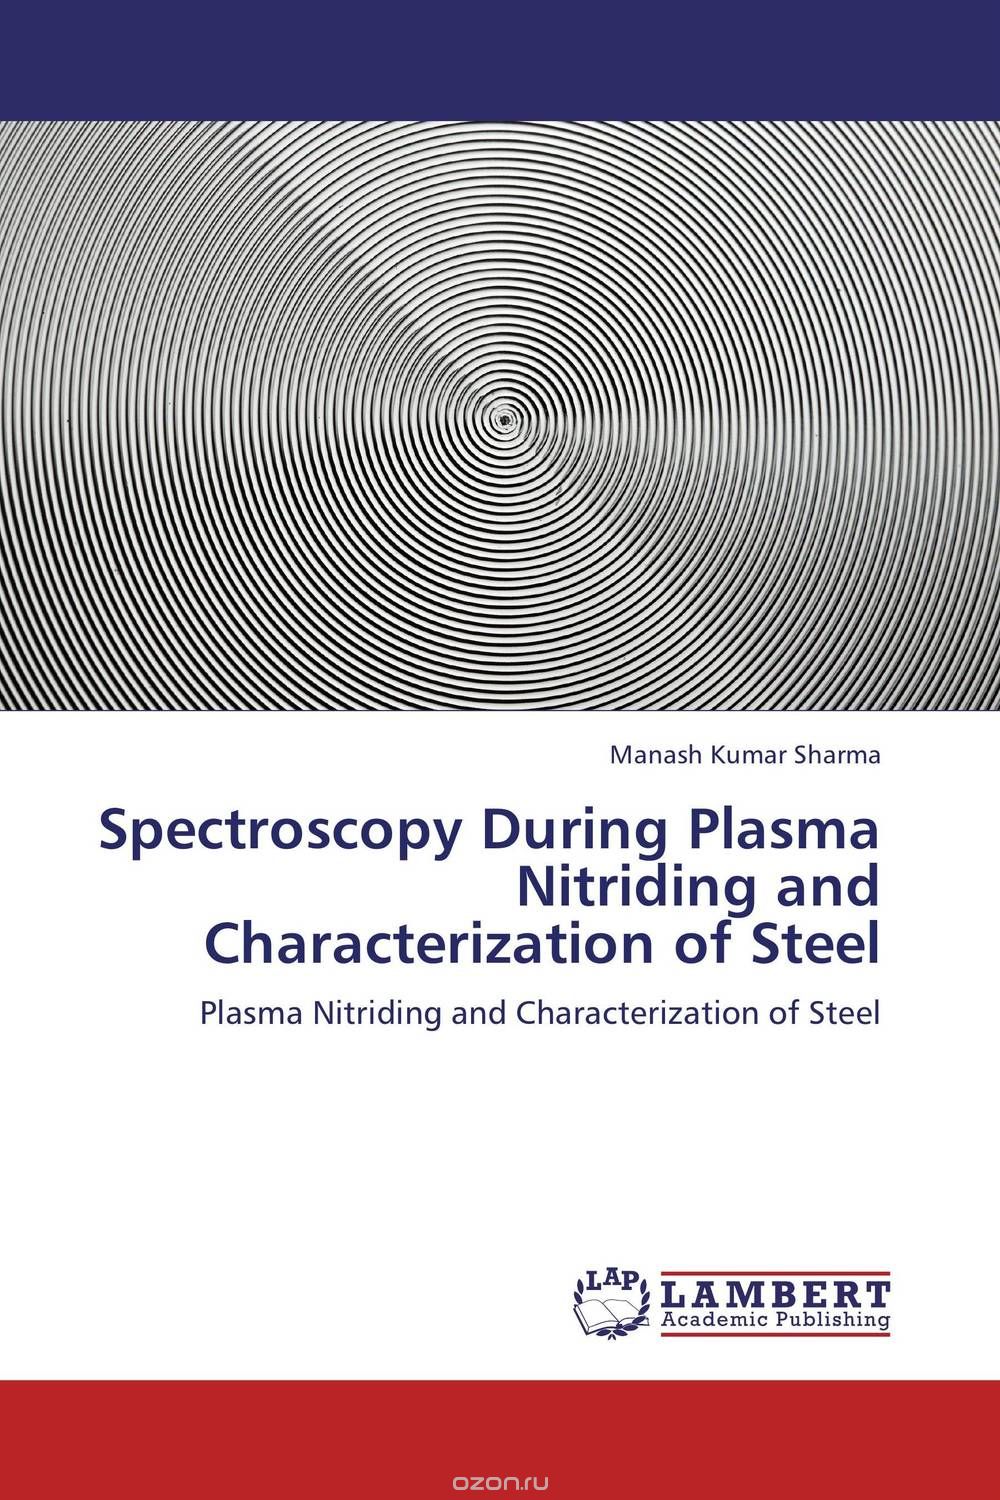 Spectroscopy During Plasma Nitriding and Characterization of Steel